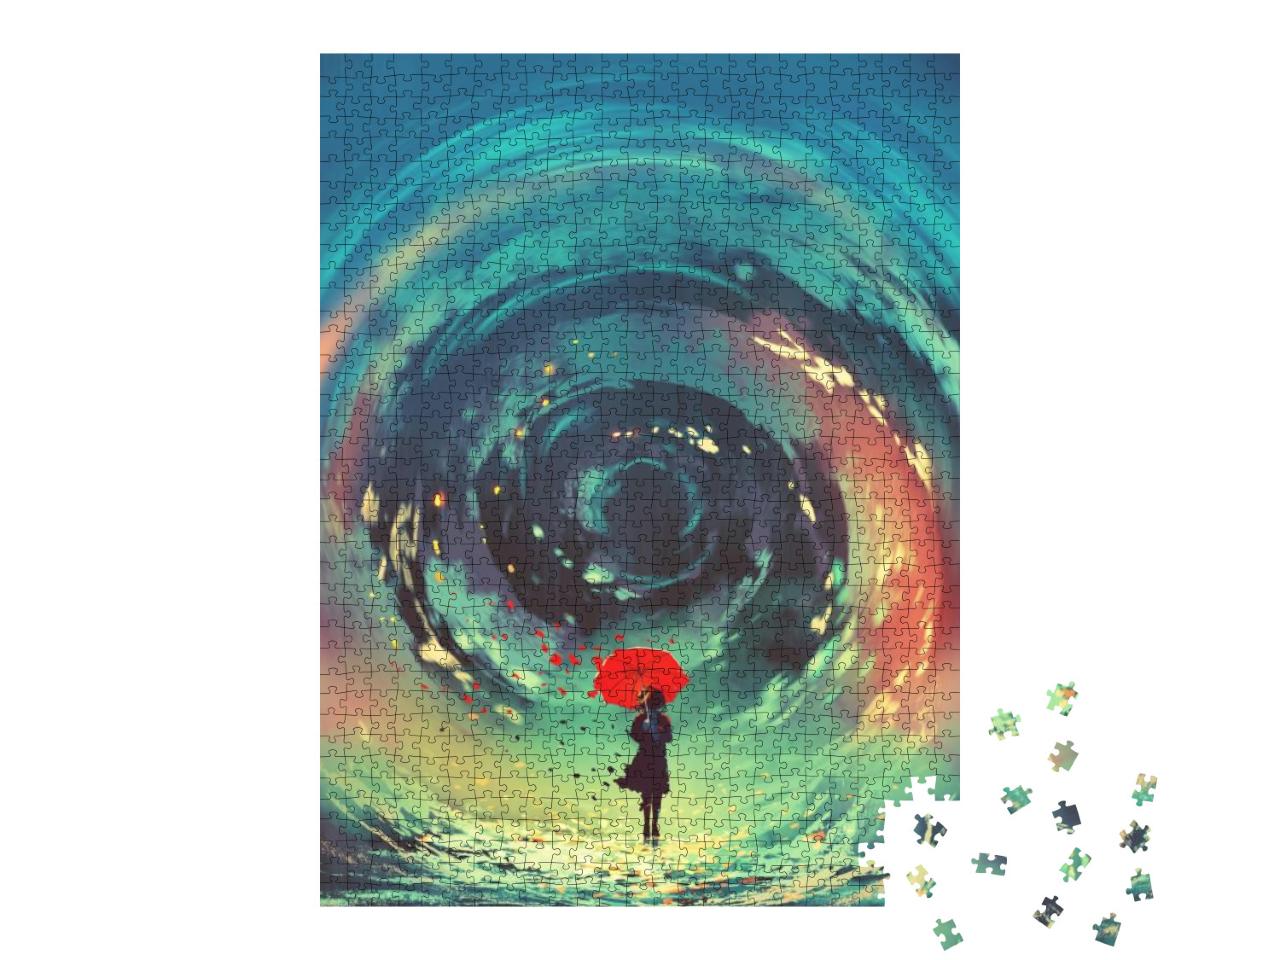 Girl with Red Umbrella Makes a Swirling Water in the Sky... Jigsaw Puzzle with 1000 pieces